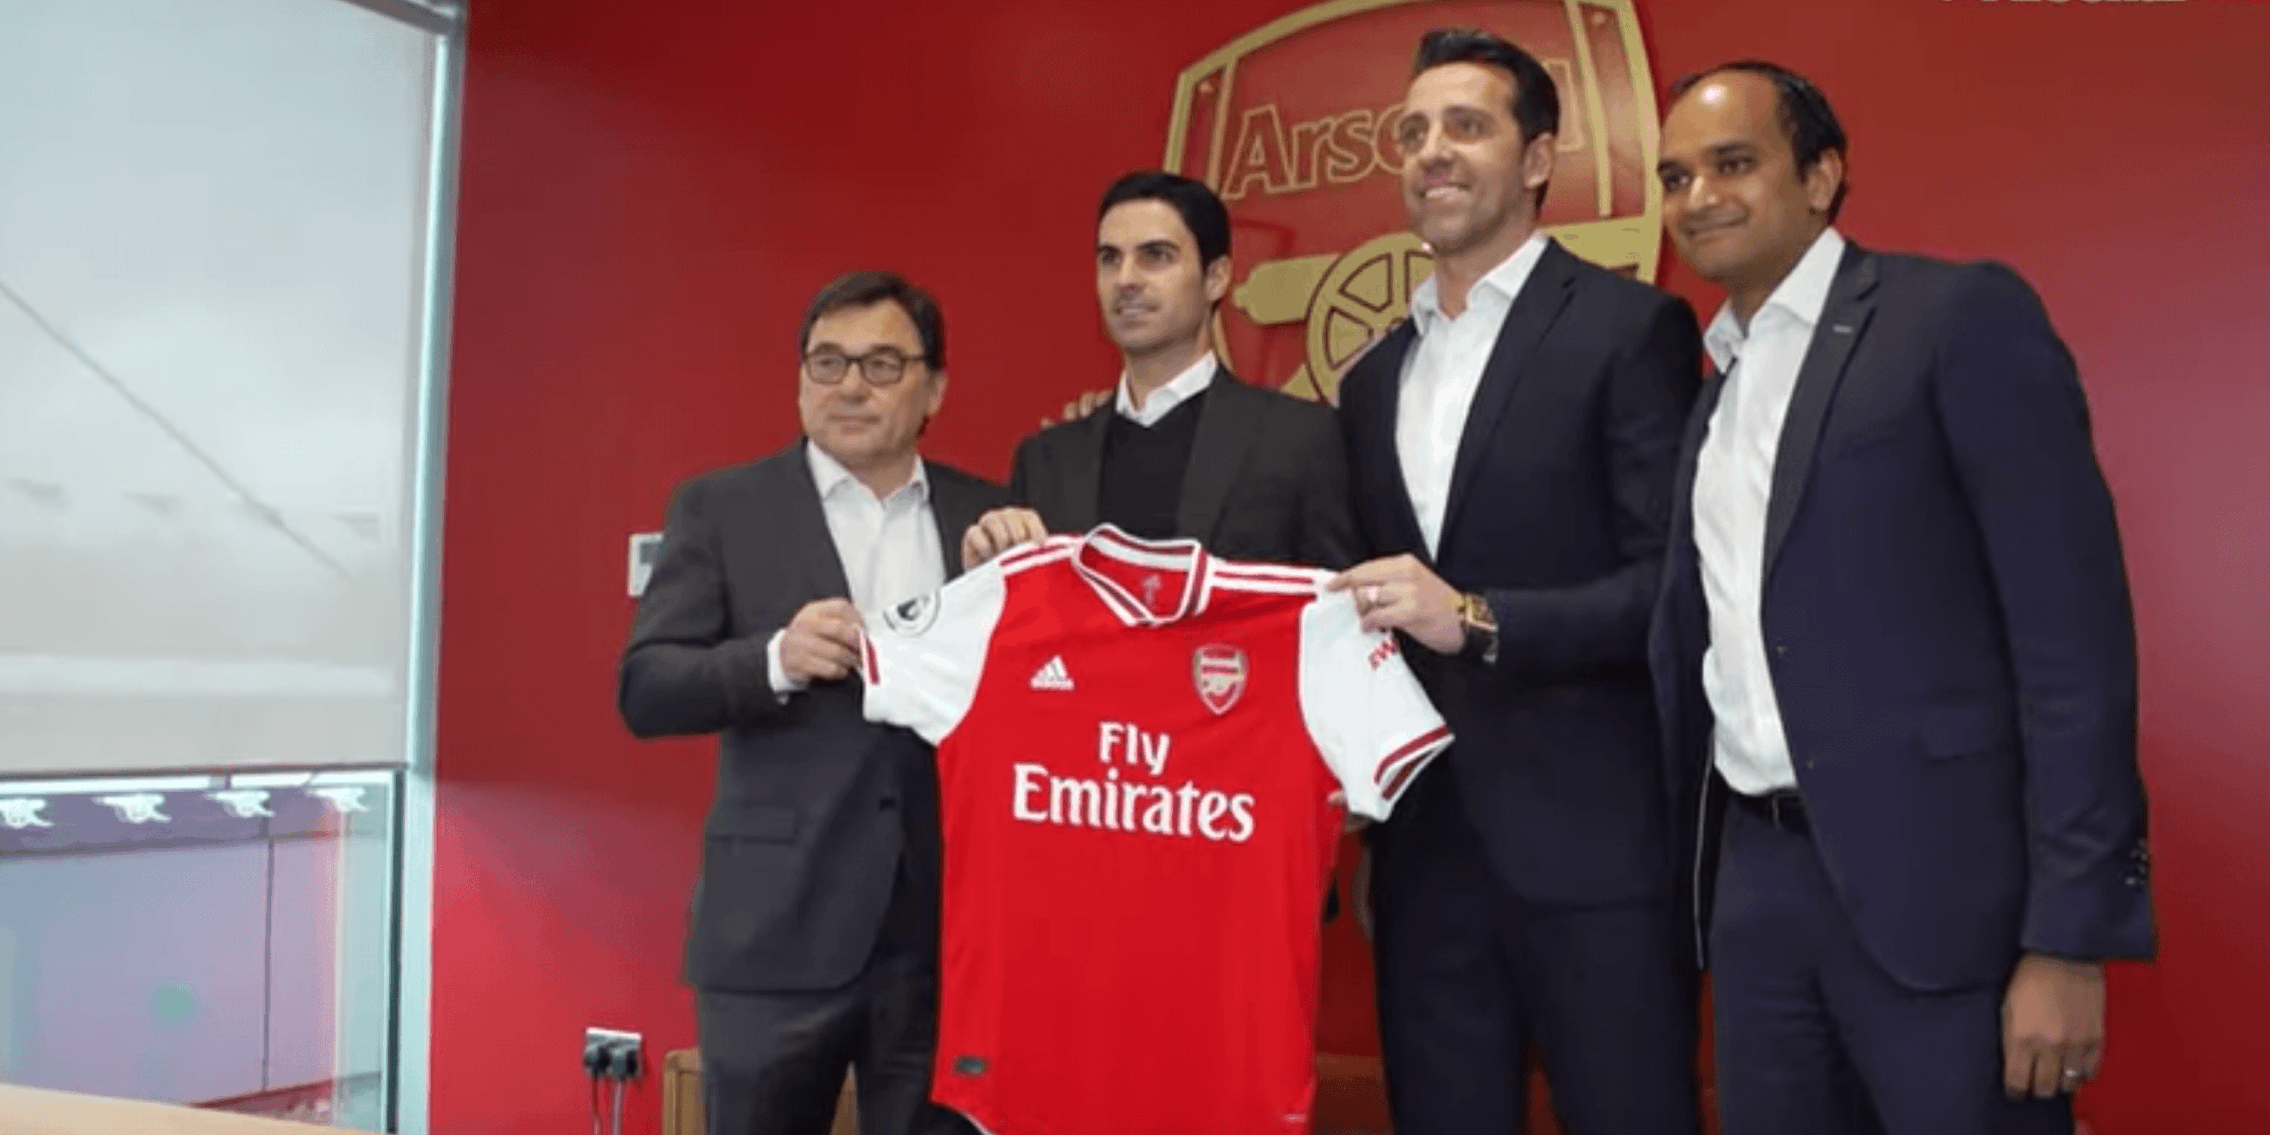 Mikel Arteta's unveiling as Arsenal manager